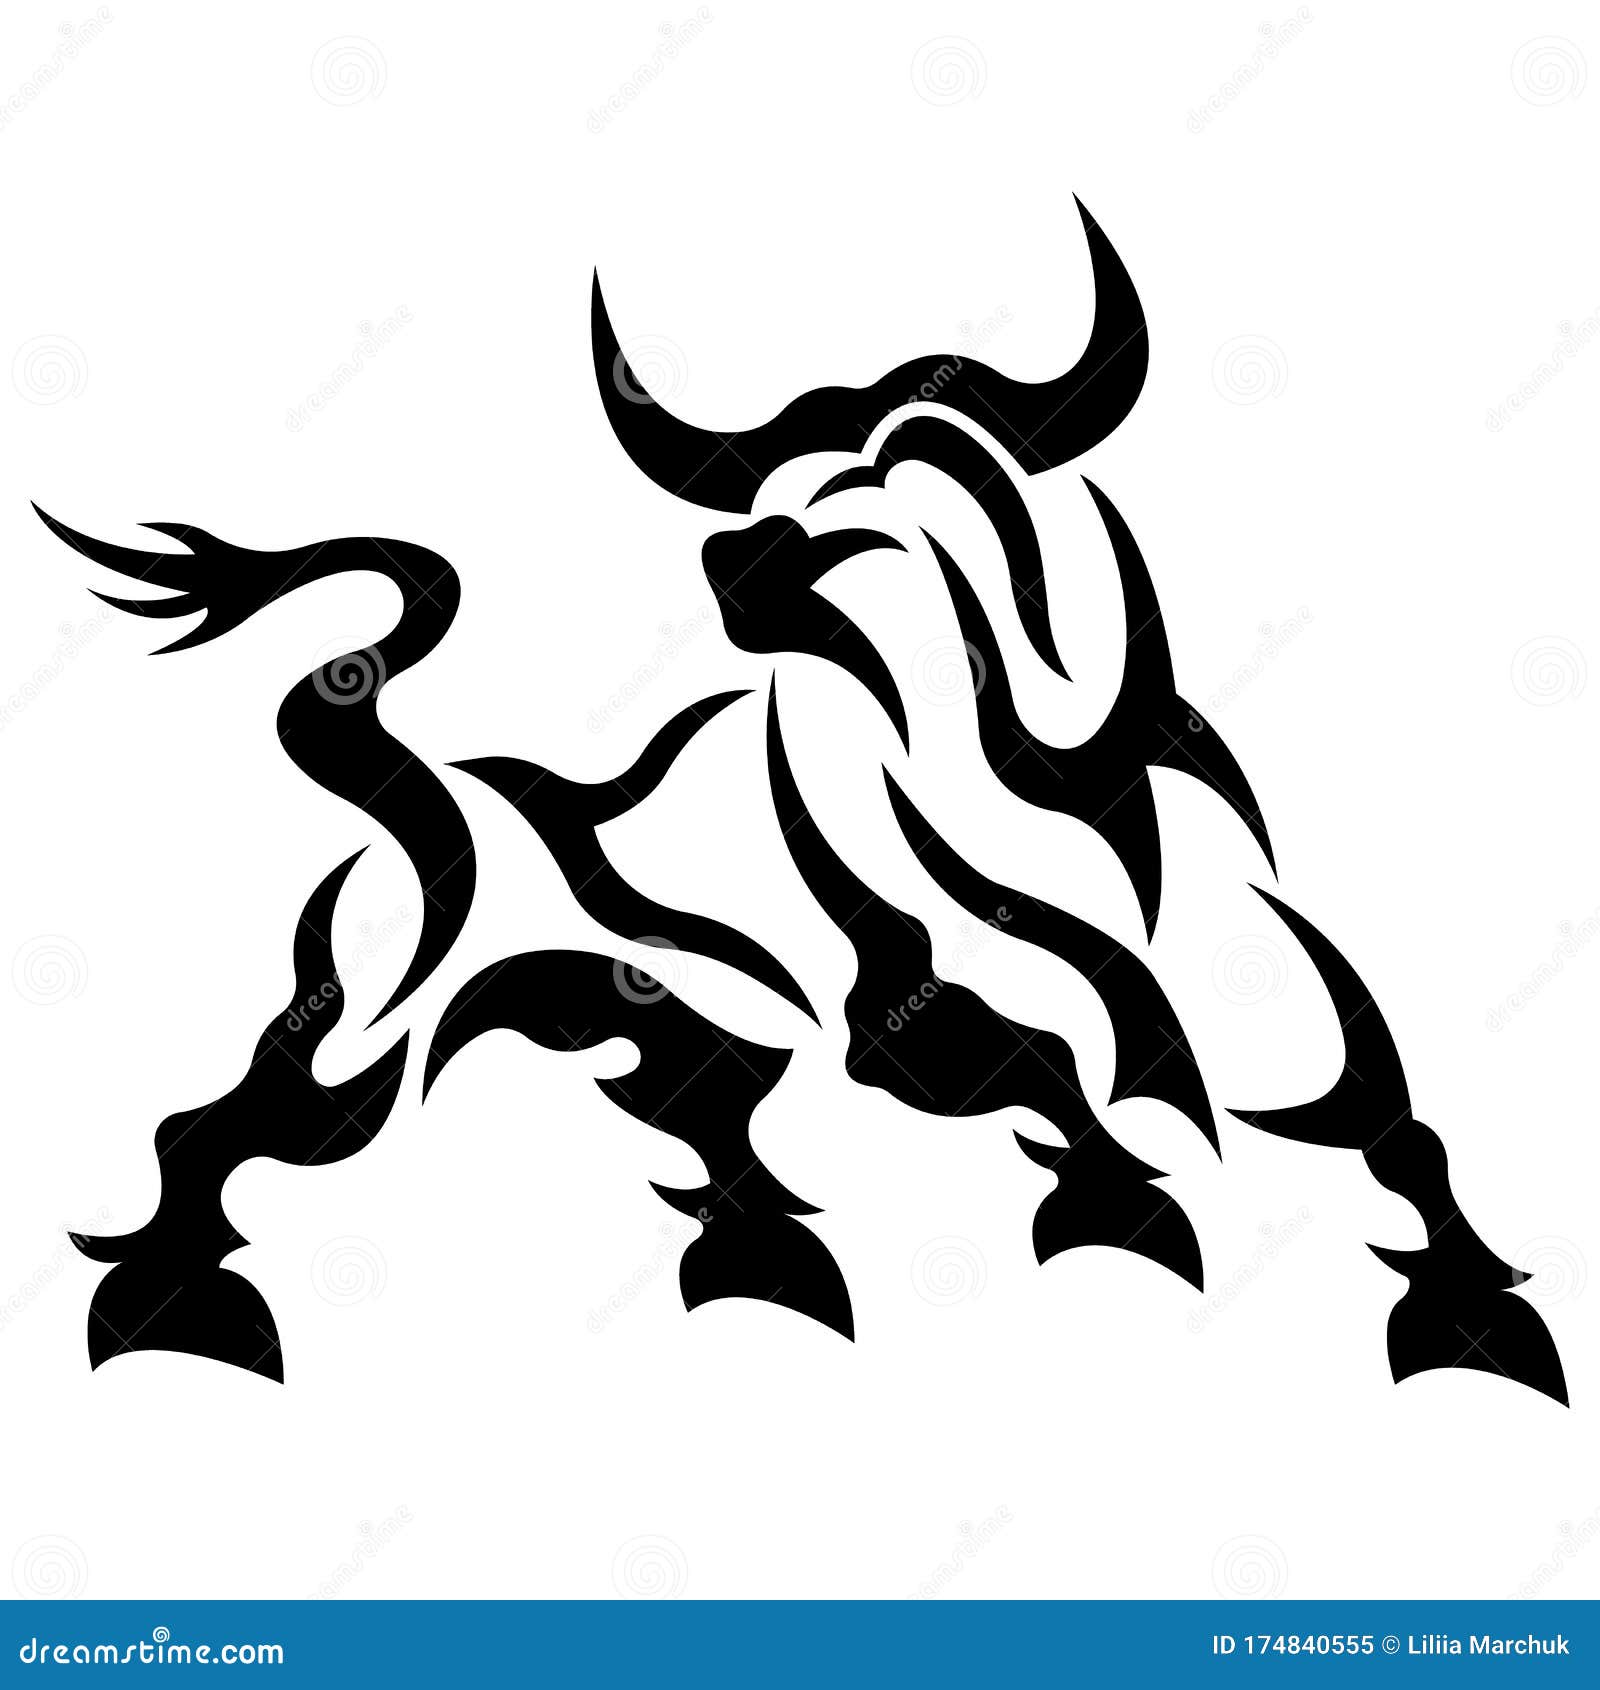 The Buffalo is a Black Silhouette Drawn in Various Curvy Lines in a Flat  Style. Bull Tattoo, Logo, Apparel Design Emblem Stock Vector - Illustration  of danger, drawing: 174840555